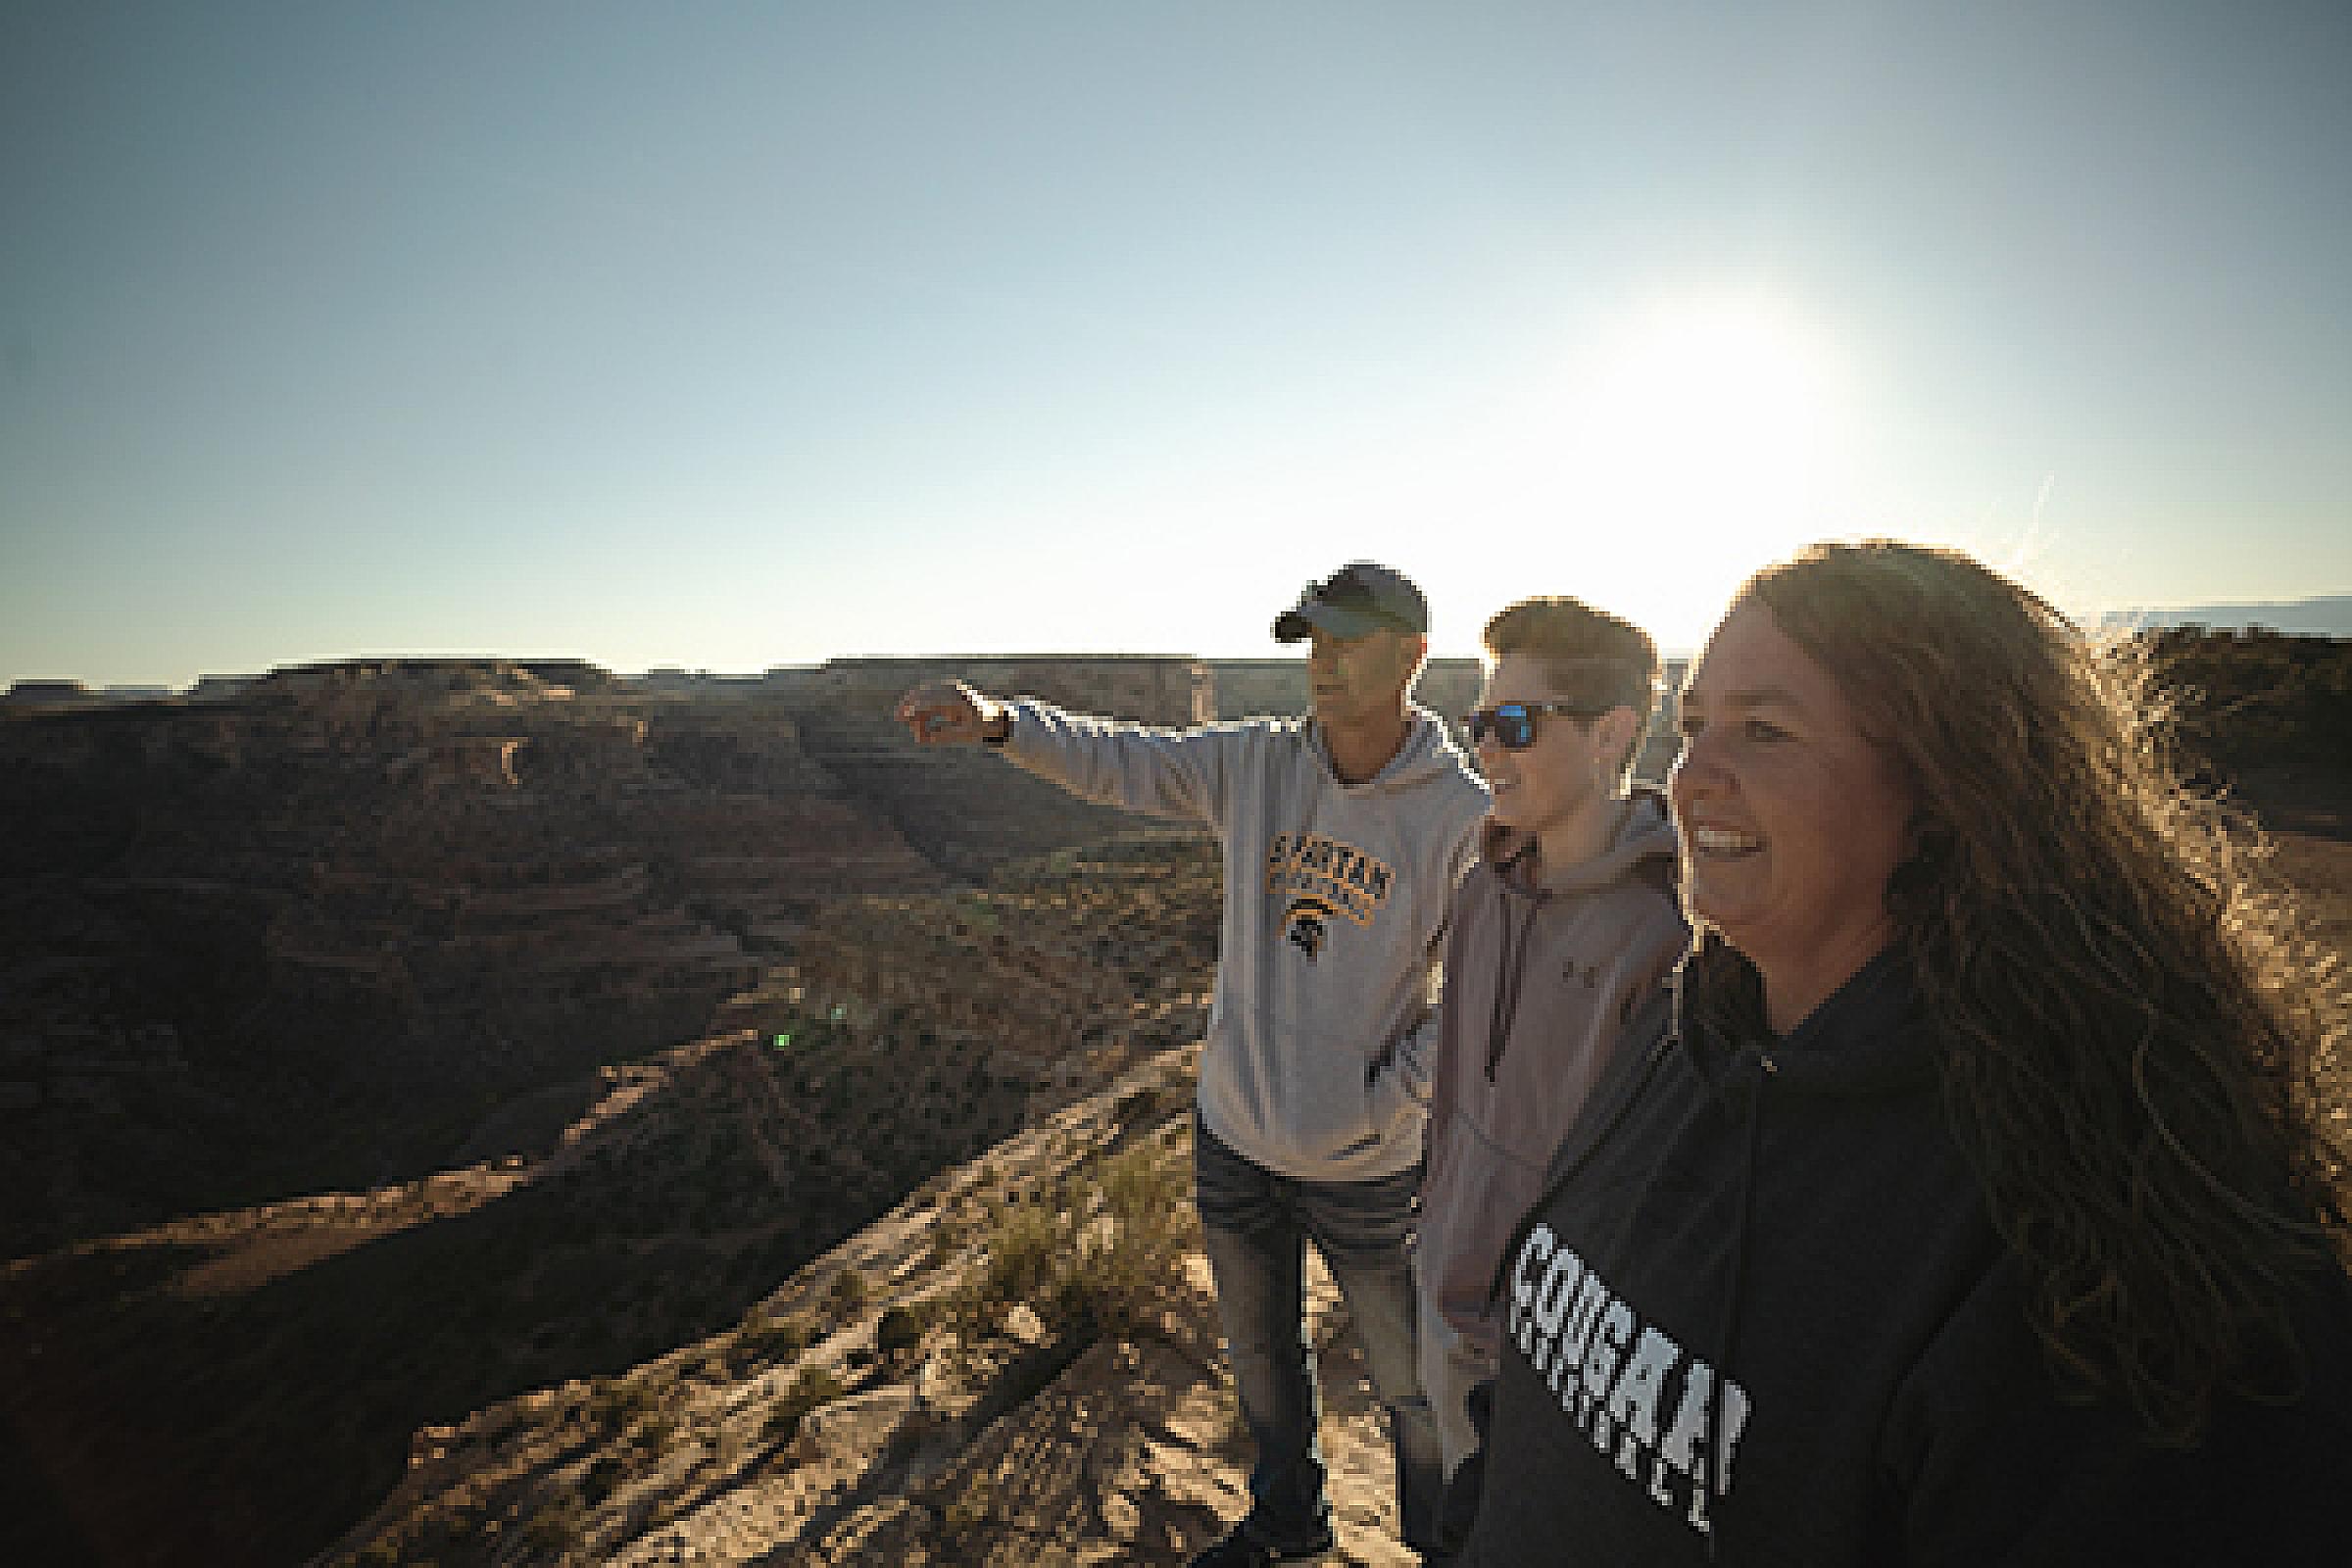 Erin Hurst and her parents standing on the edge of a cliff